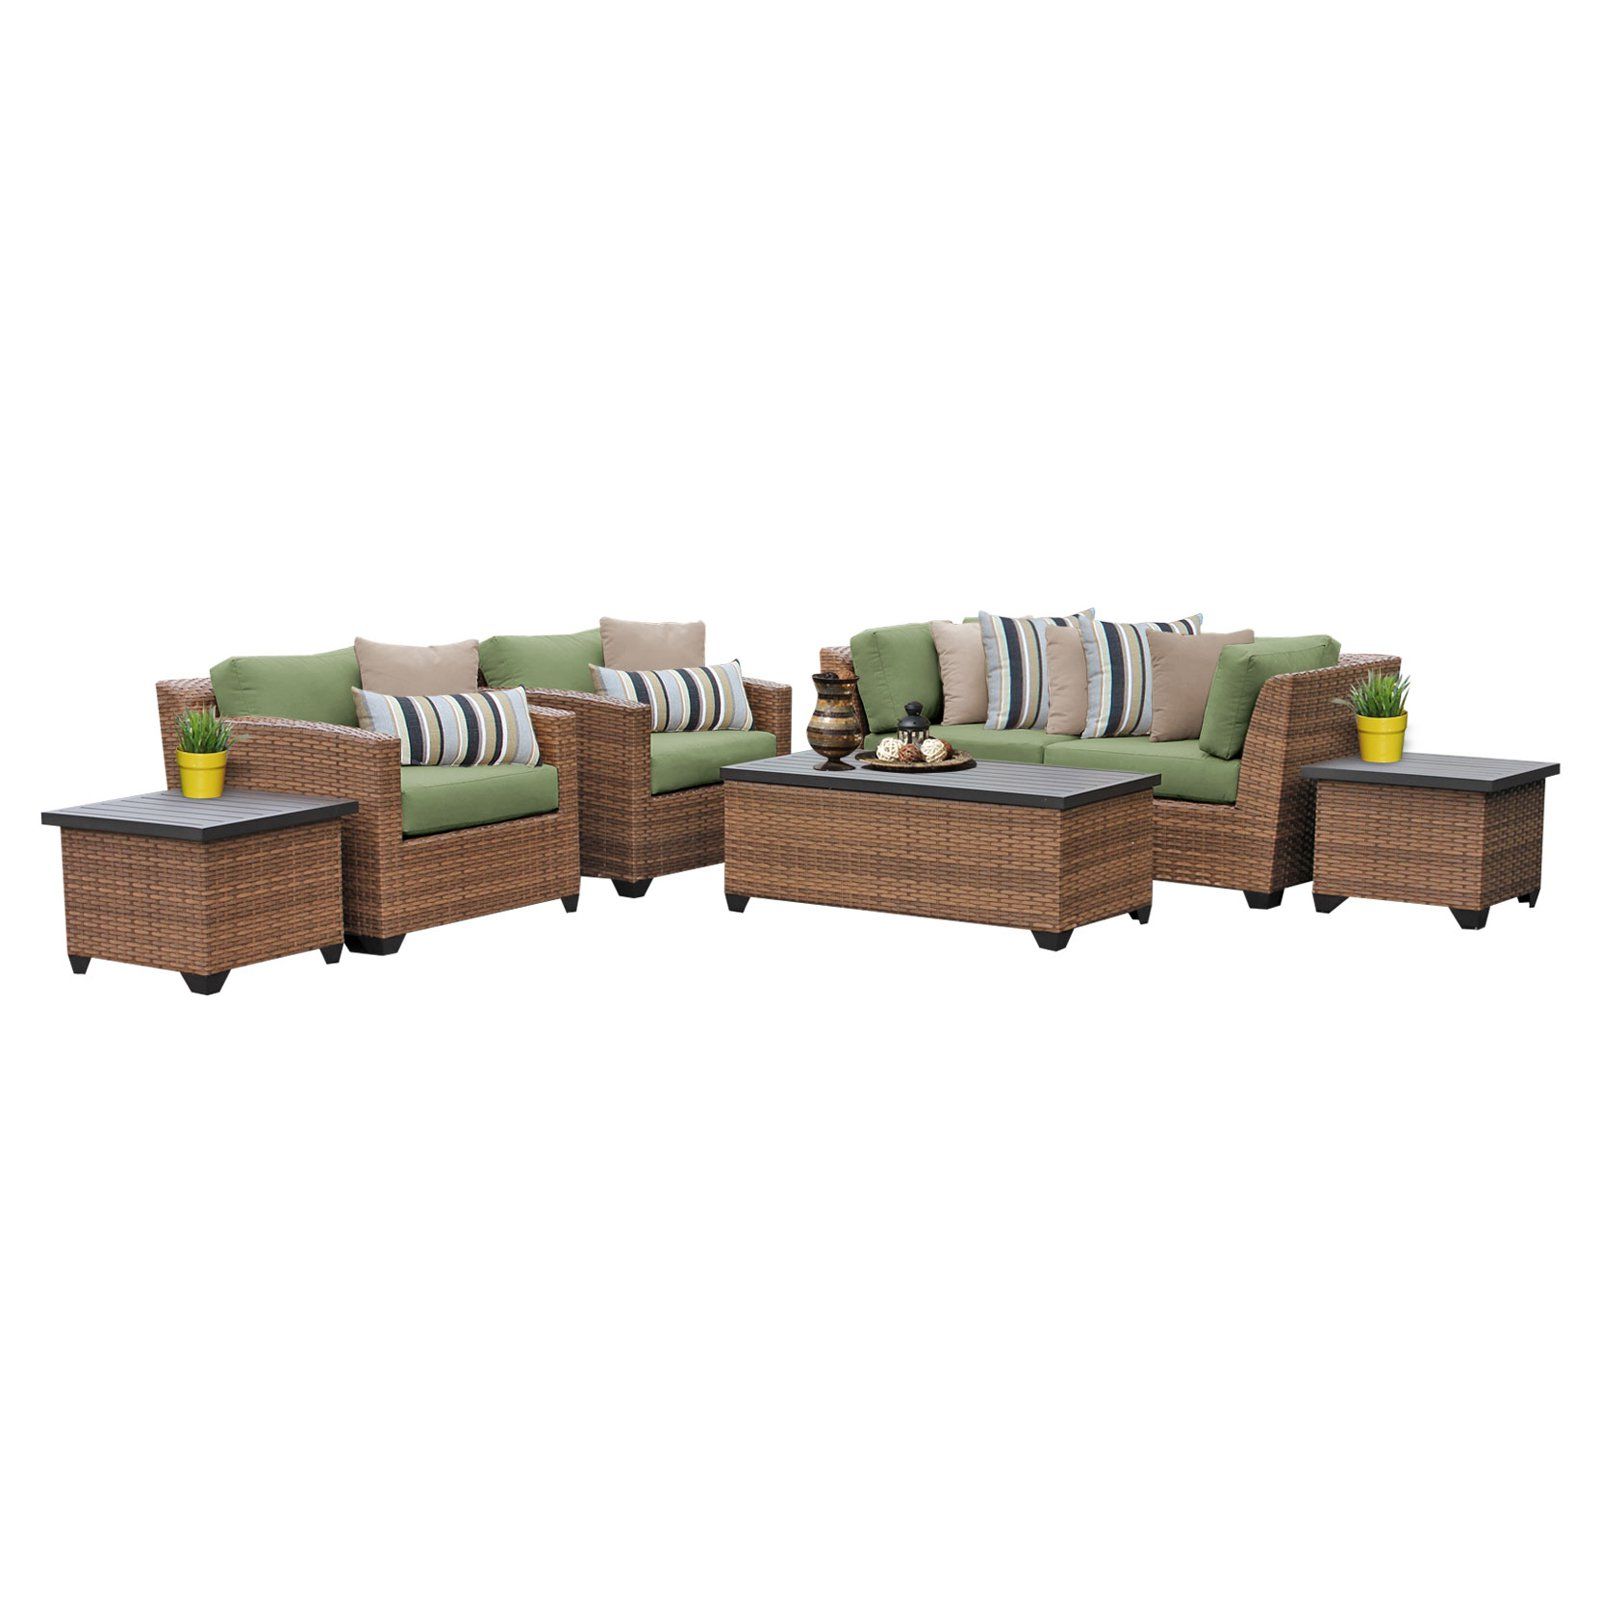 Laguna Outdoor Sofas With Cushions With Regard To Trendy Outdoor Tk Classics Laguna Wicker 7 Piece Patio Conversation (View 9 of 20)